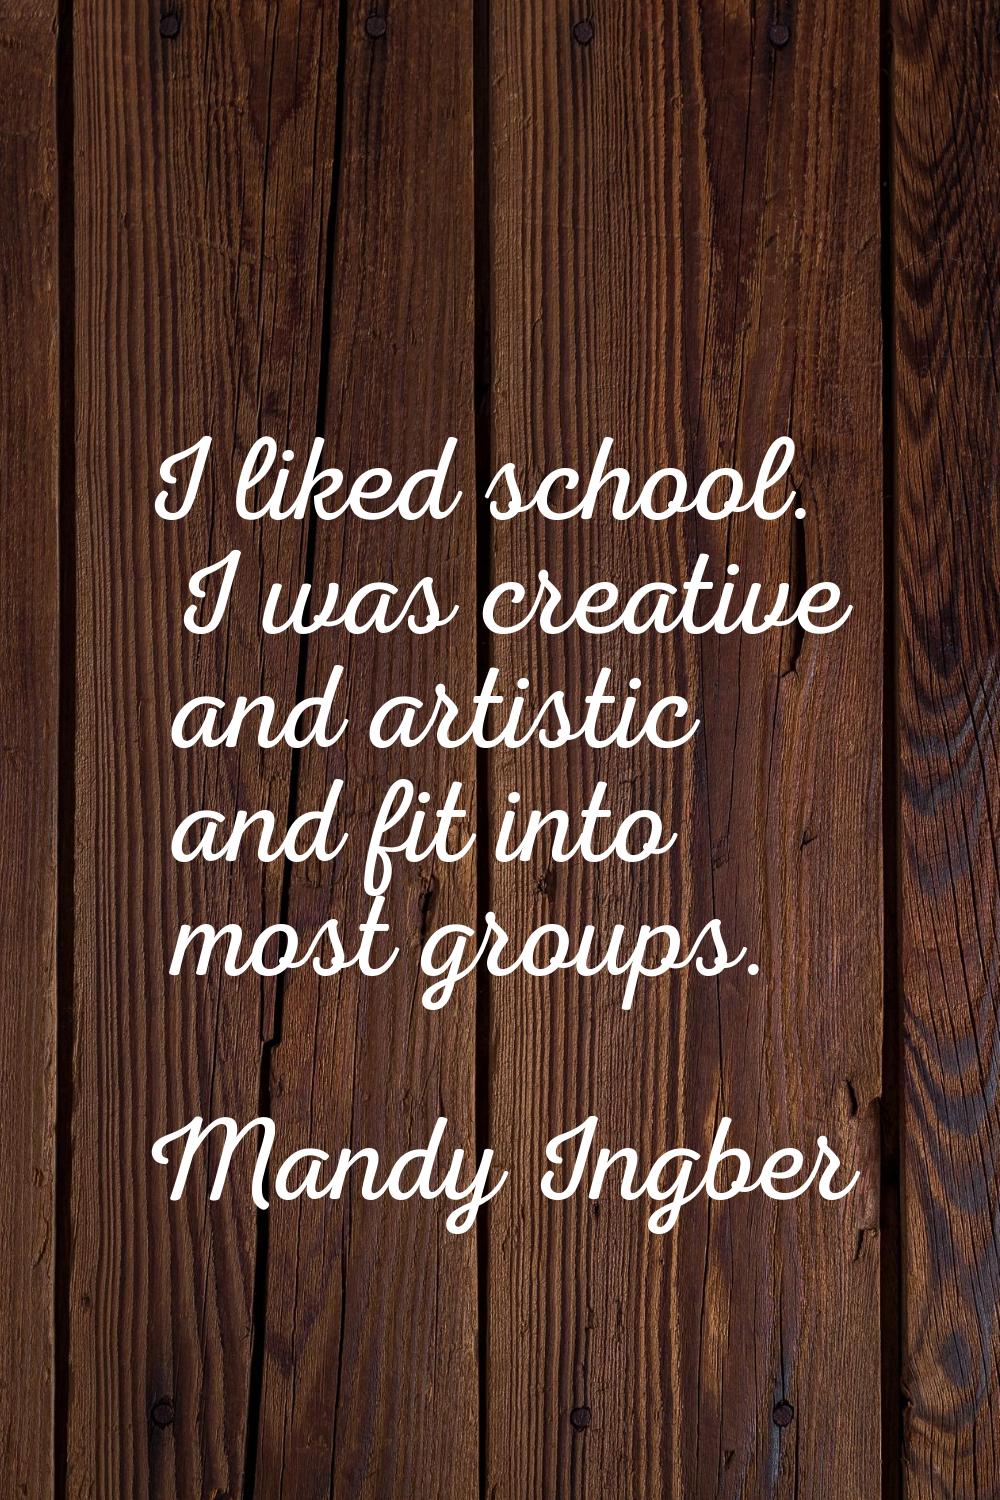 I liked school. I was creative and artistic and fit into most groups.